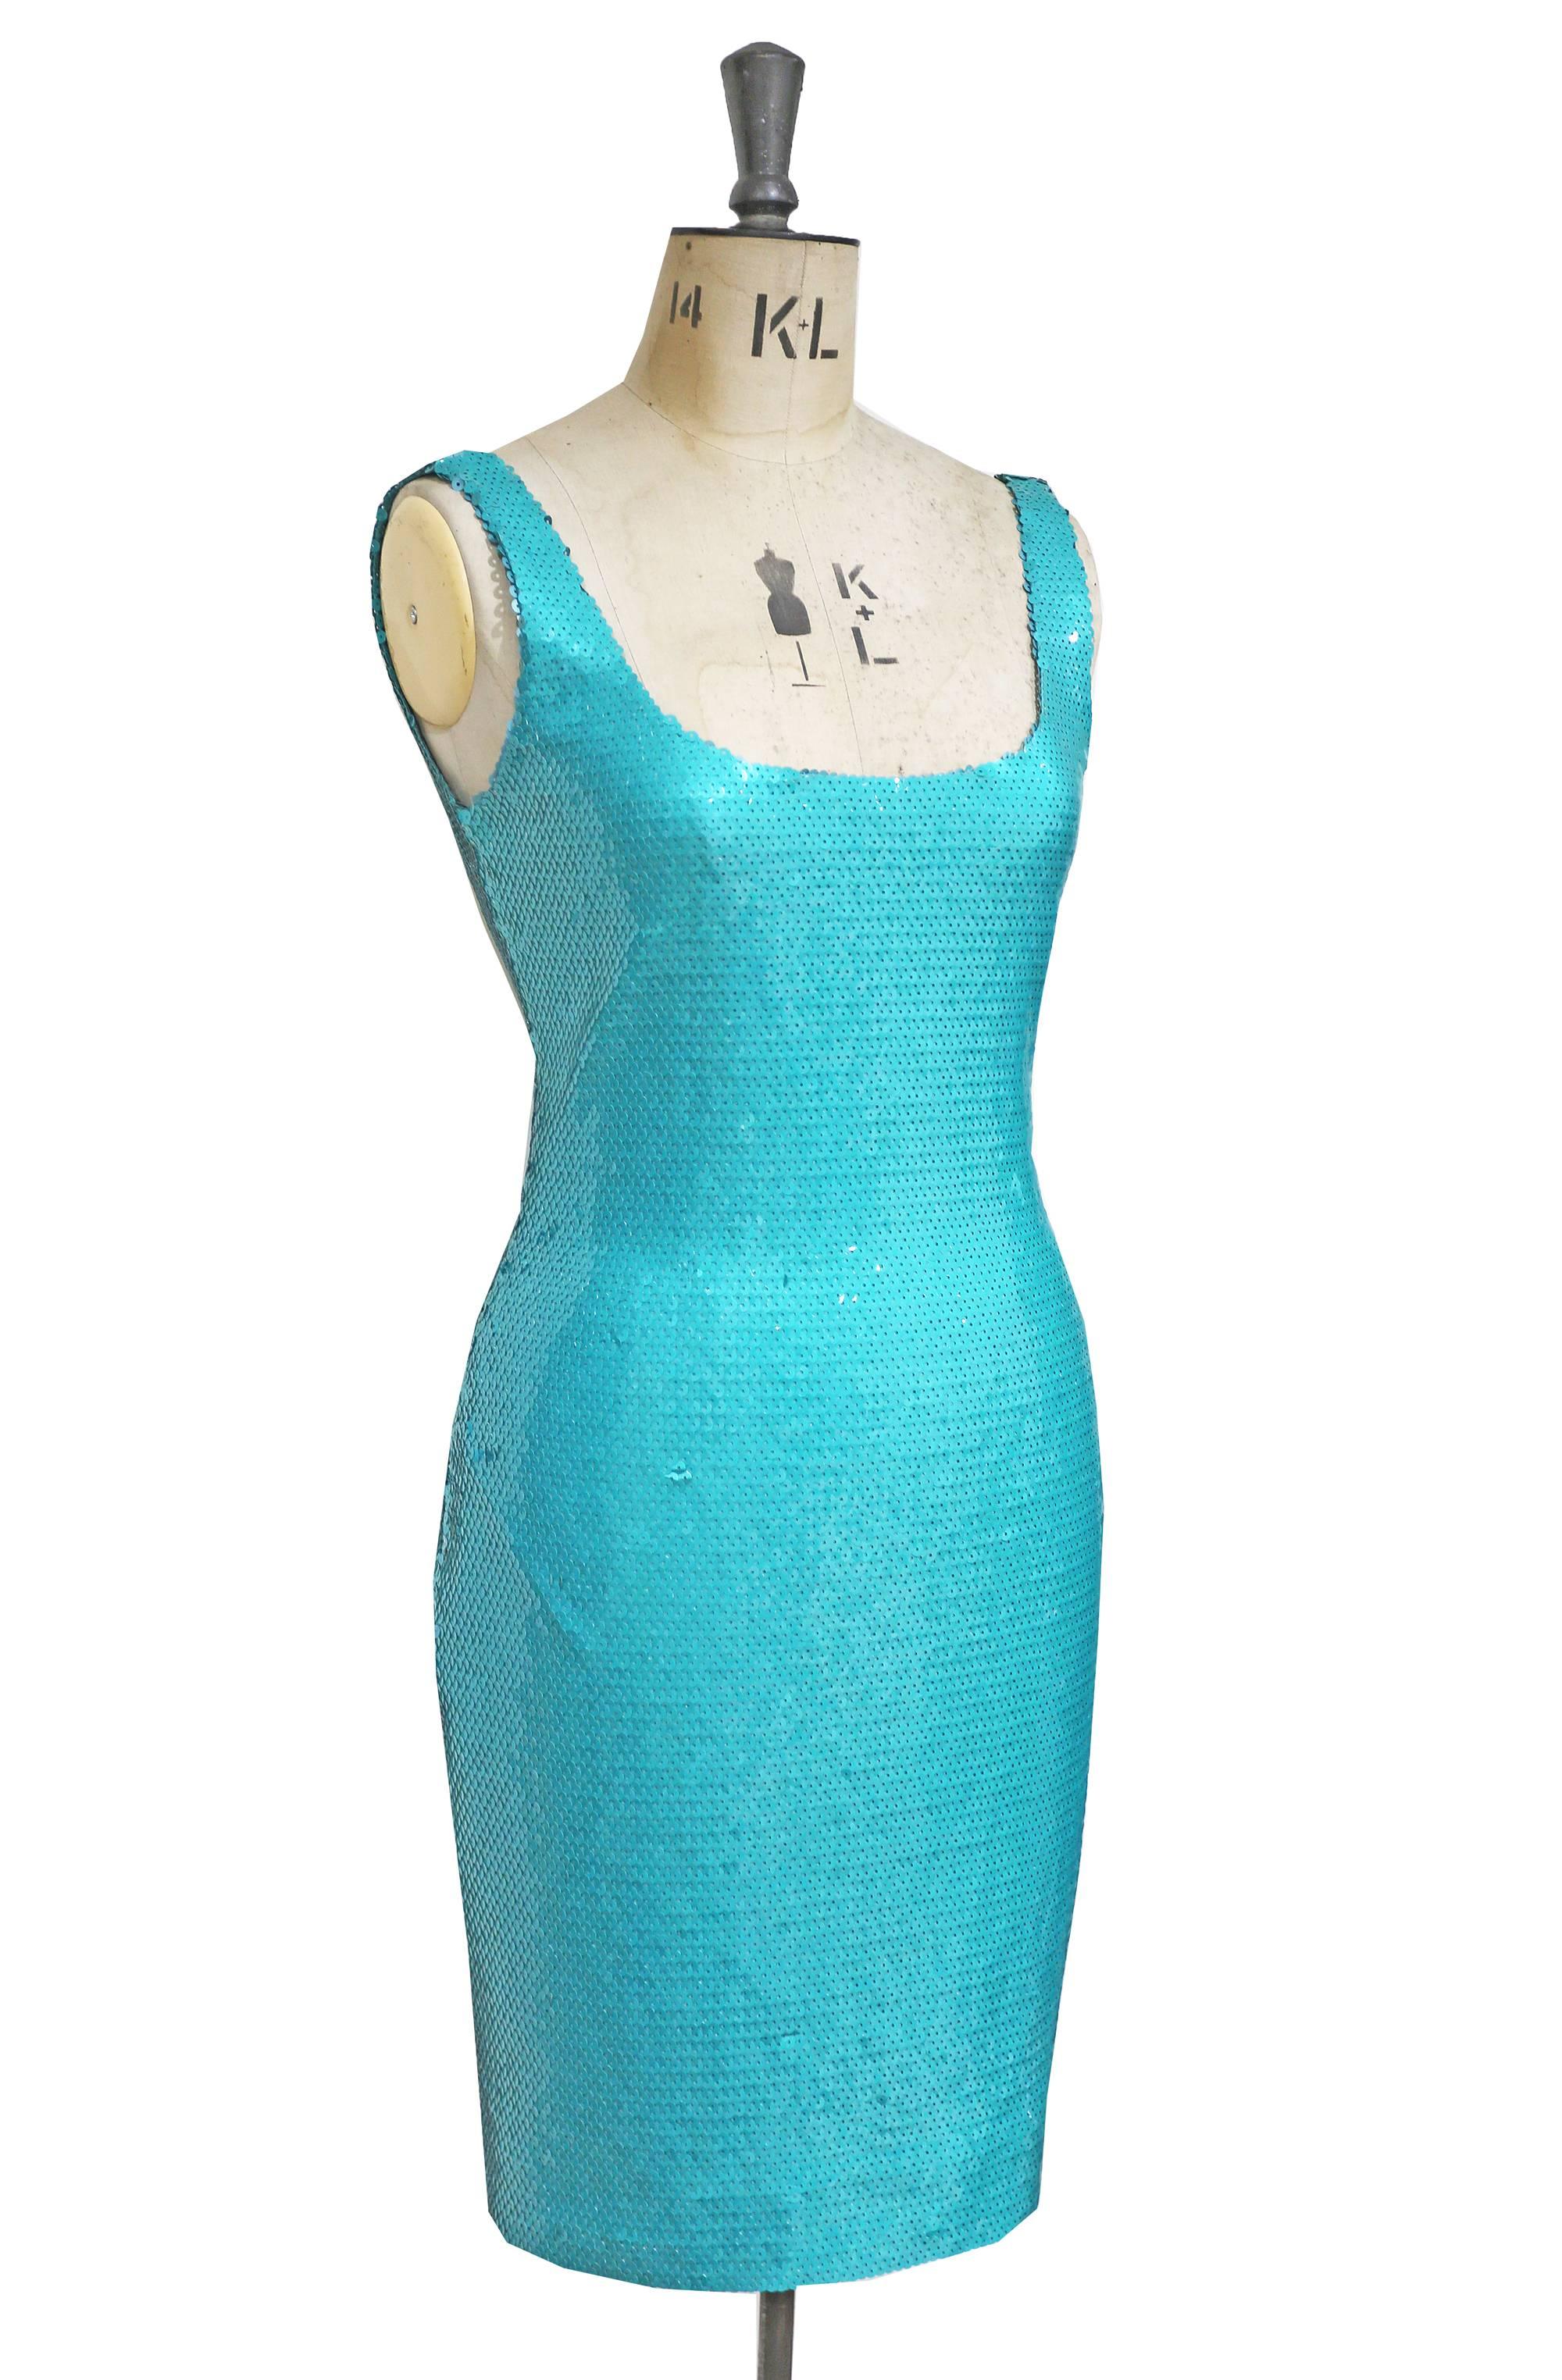 Rare Stephen Sprouse bodycon evening dress from the 1980s. The dress has low back and is covered in sequins throughout. 

US 8 - UK 12 - FRENCH (EU) 40